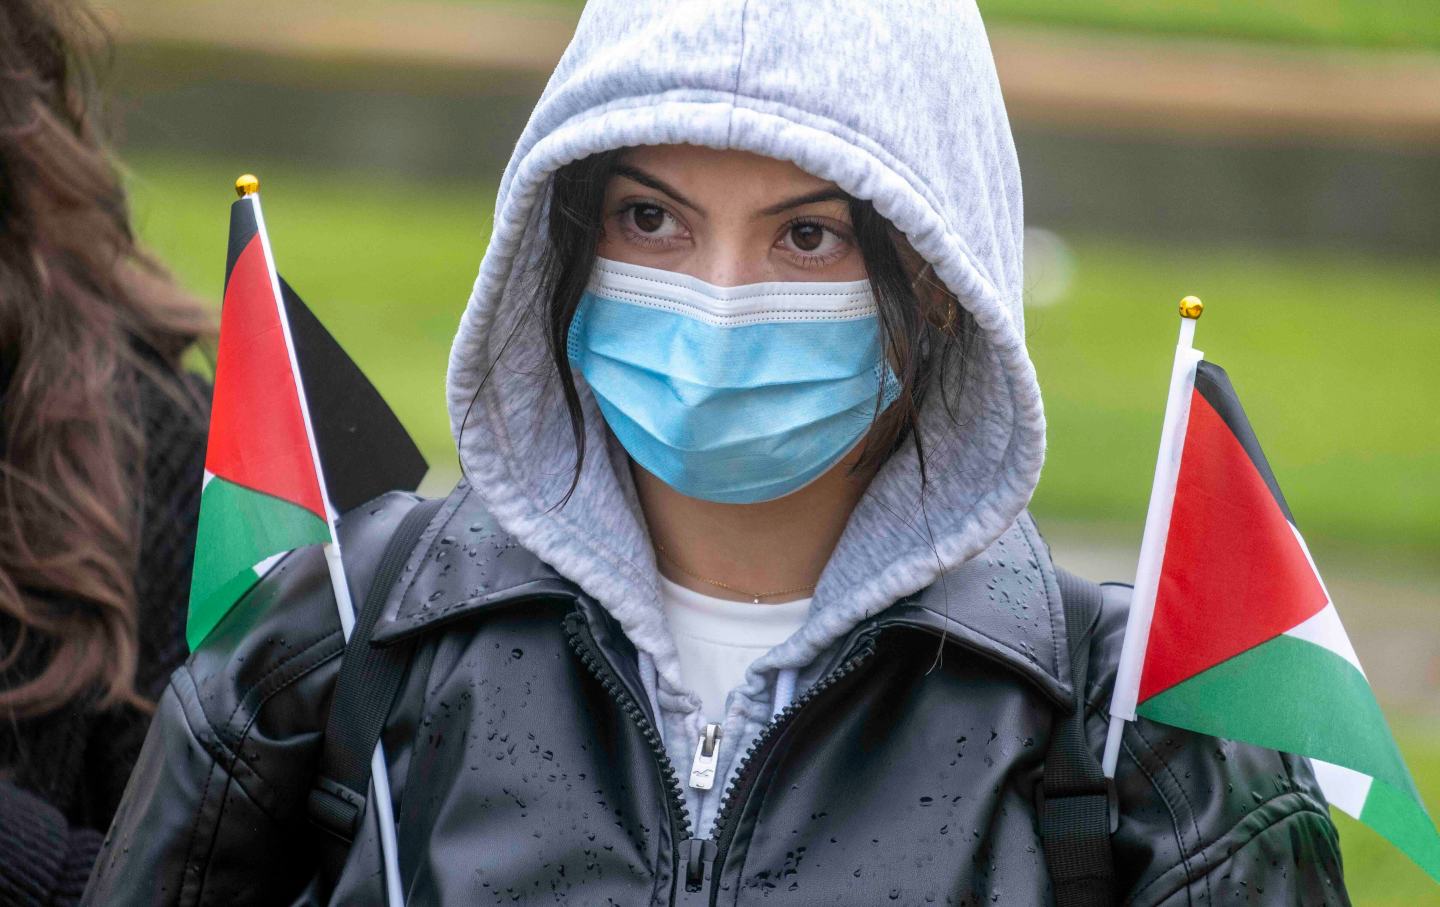 A rainy pro-Palestine protest in Los Angeles.